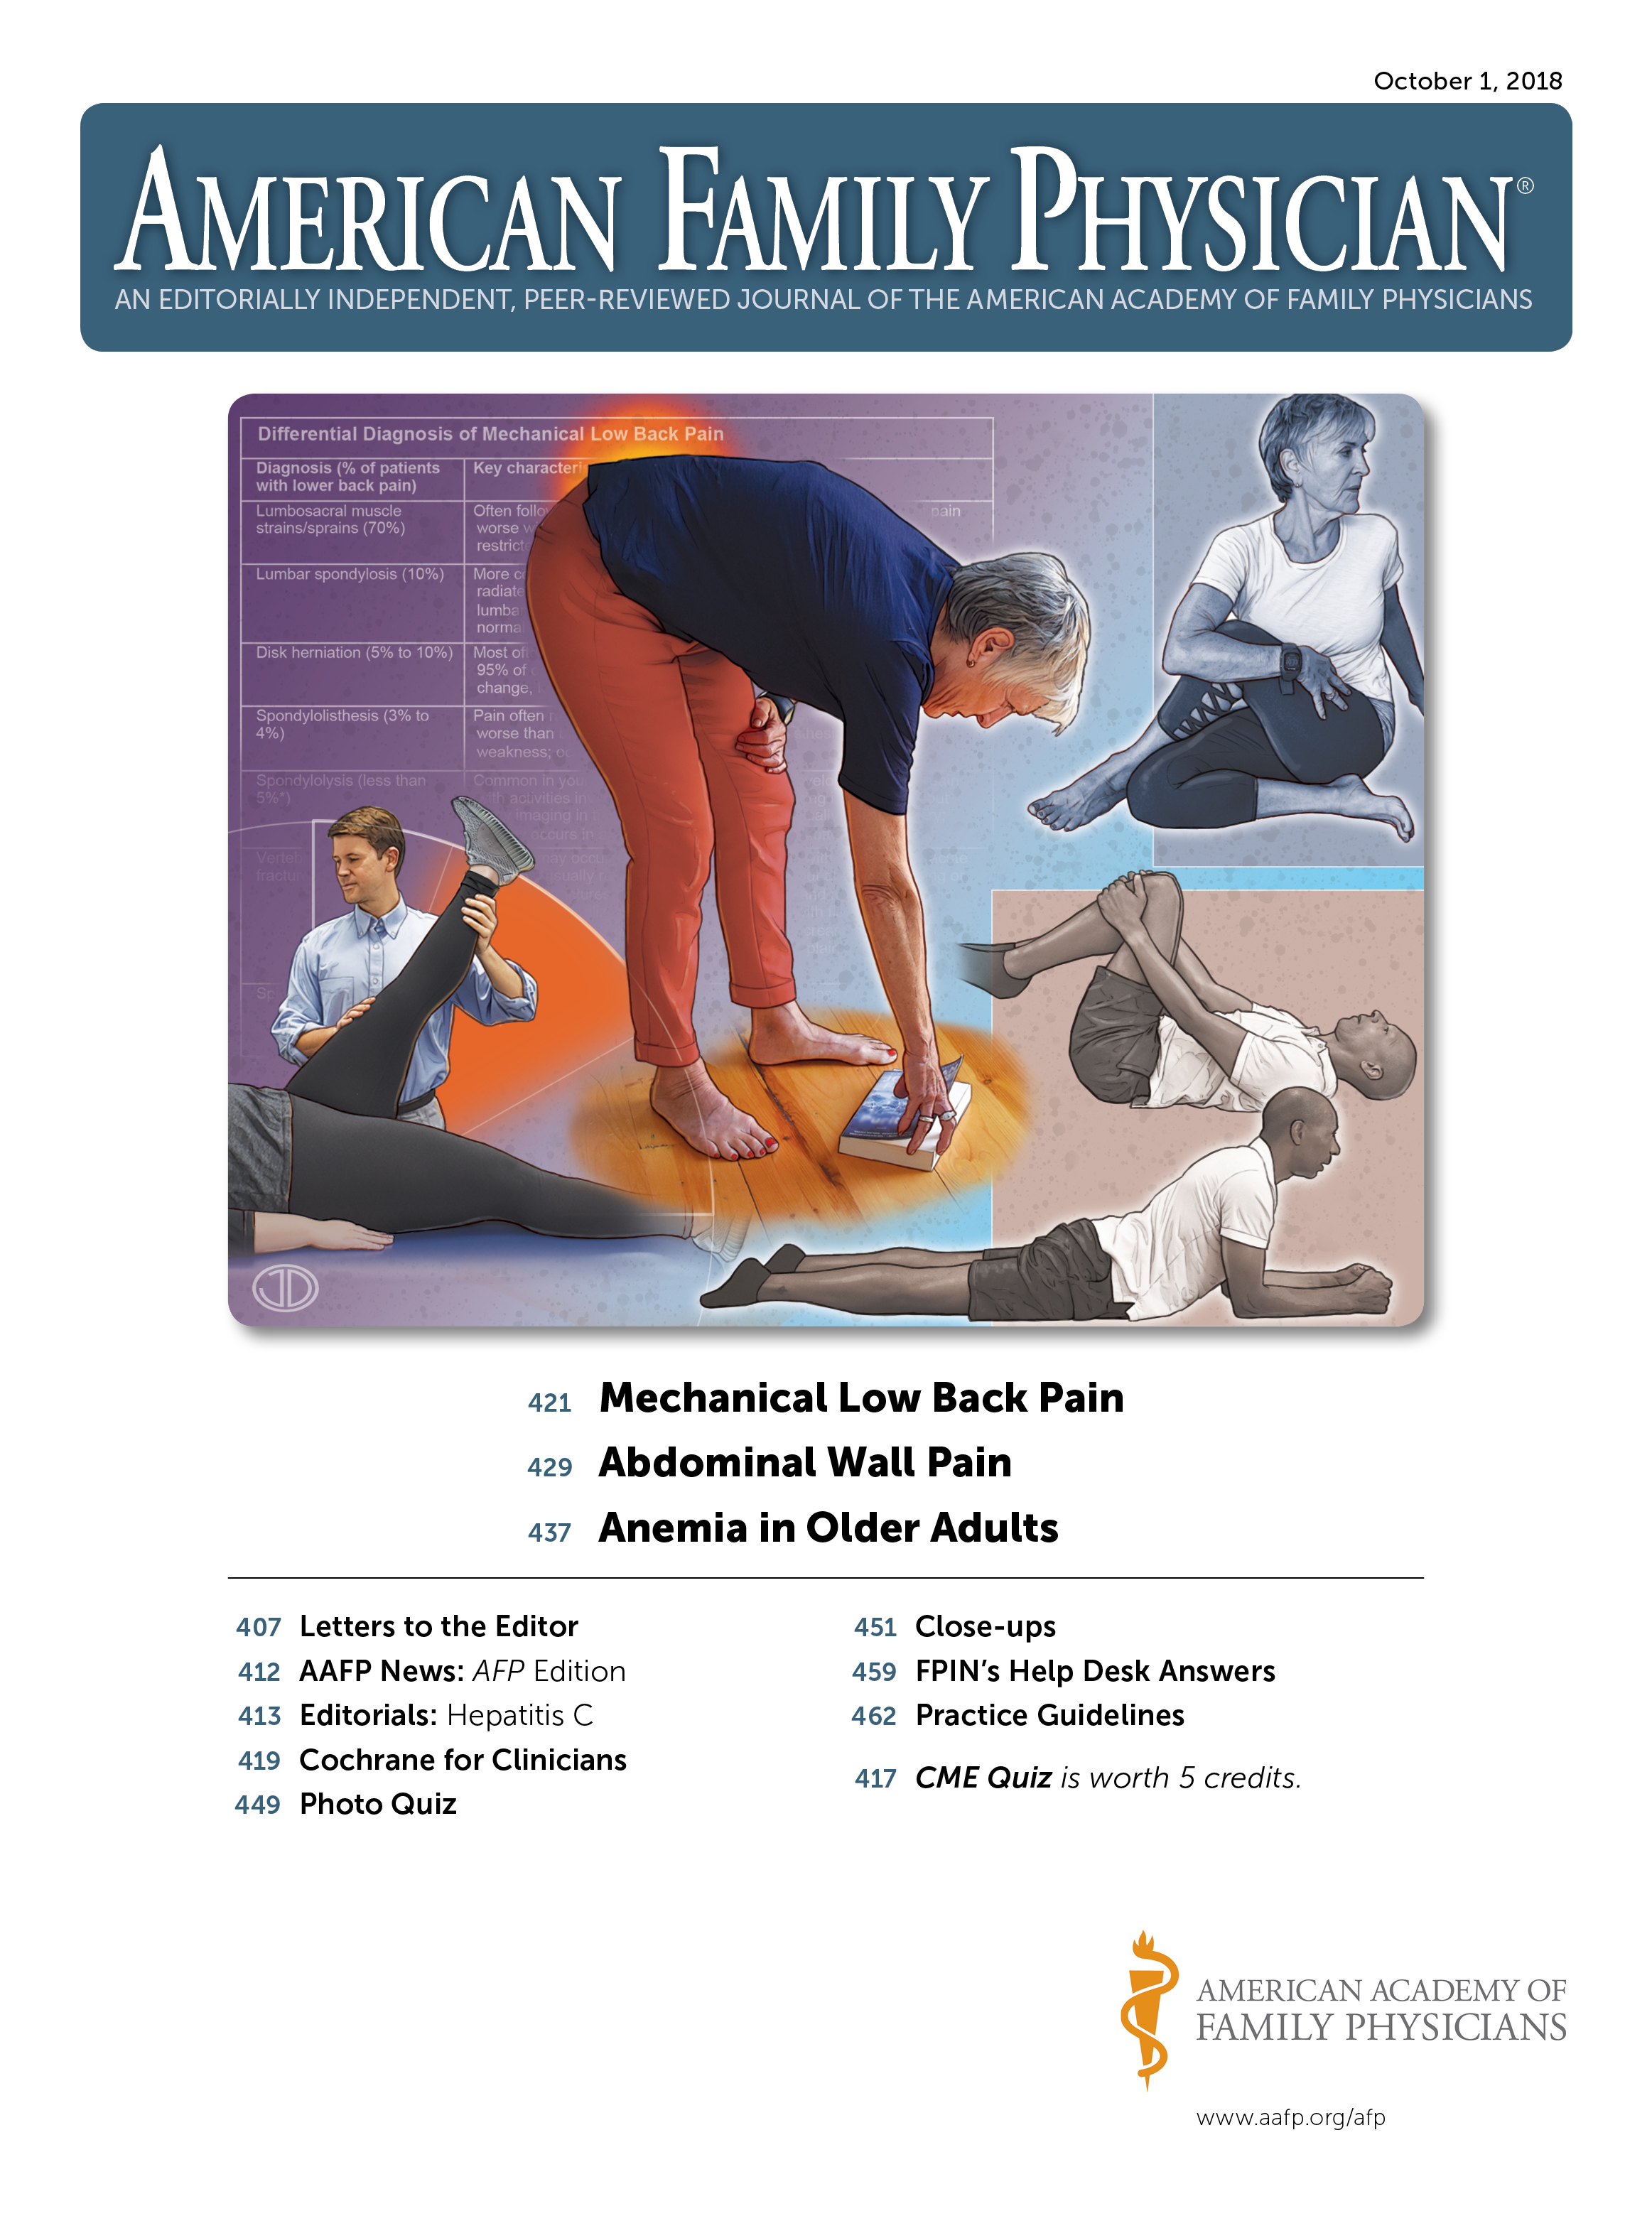 Proven Treatment for Chronic Low Back Pain